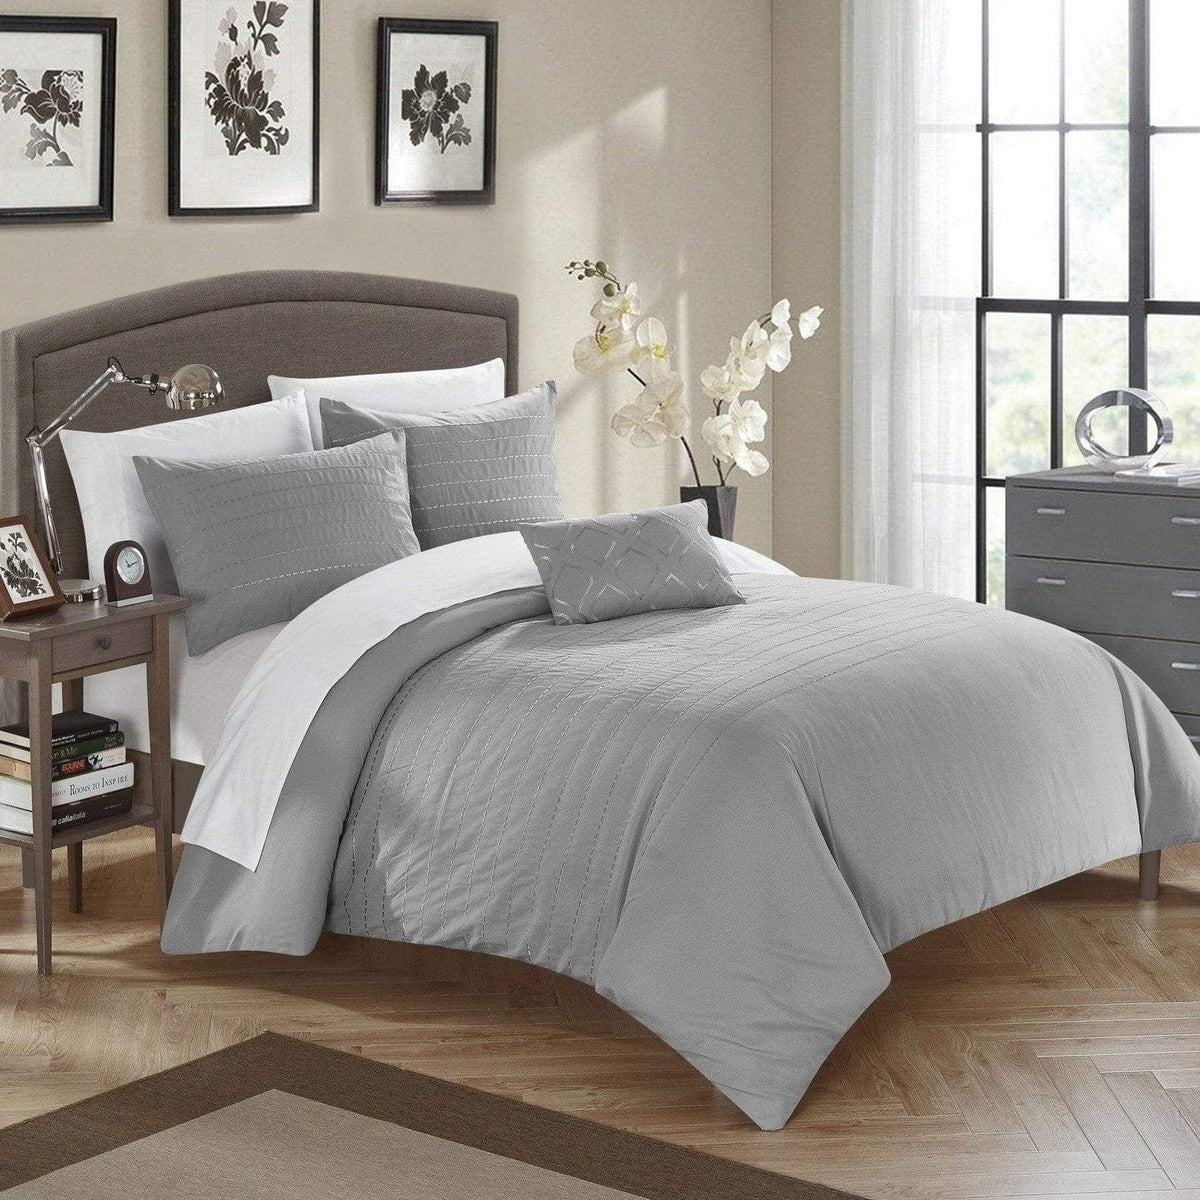 Chic Home Bea 4 Piece Embroidered Duvet Cover Set 